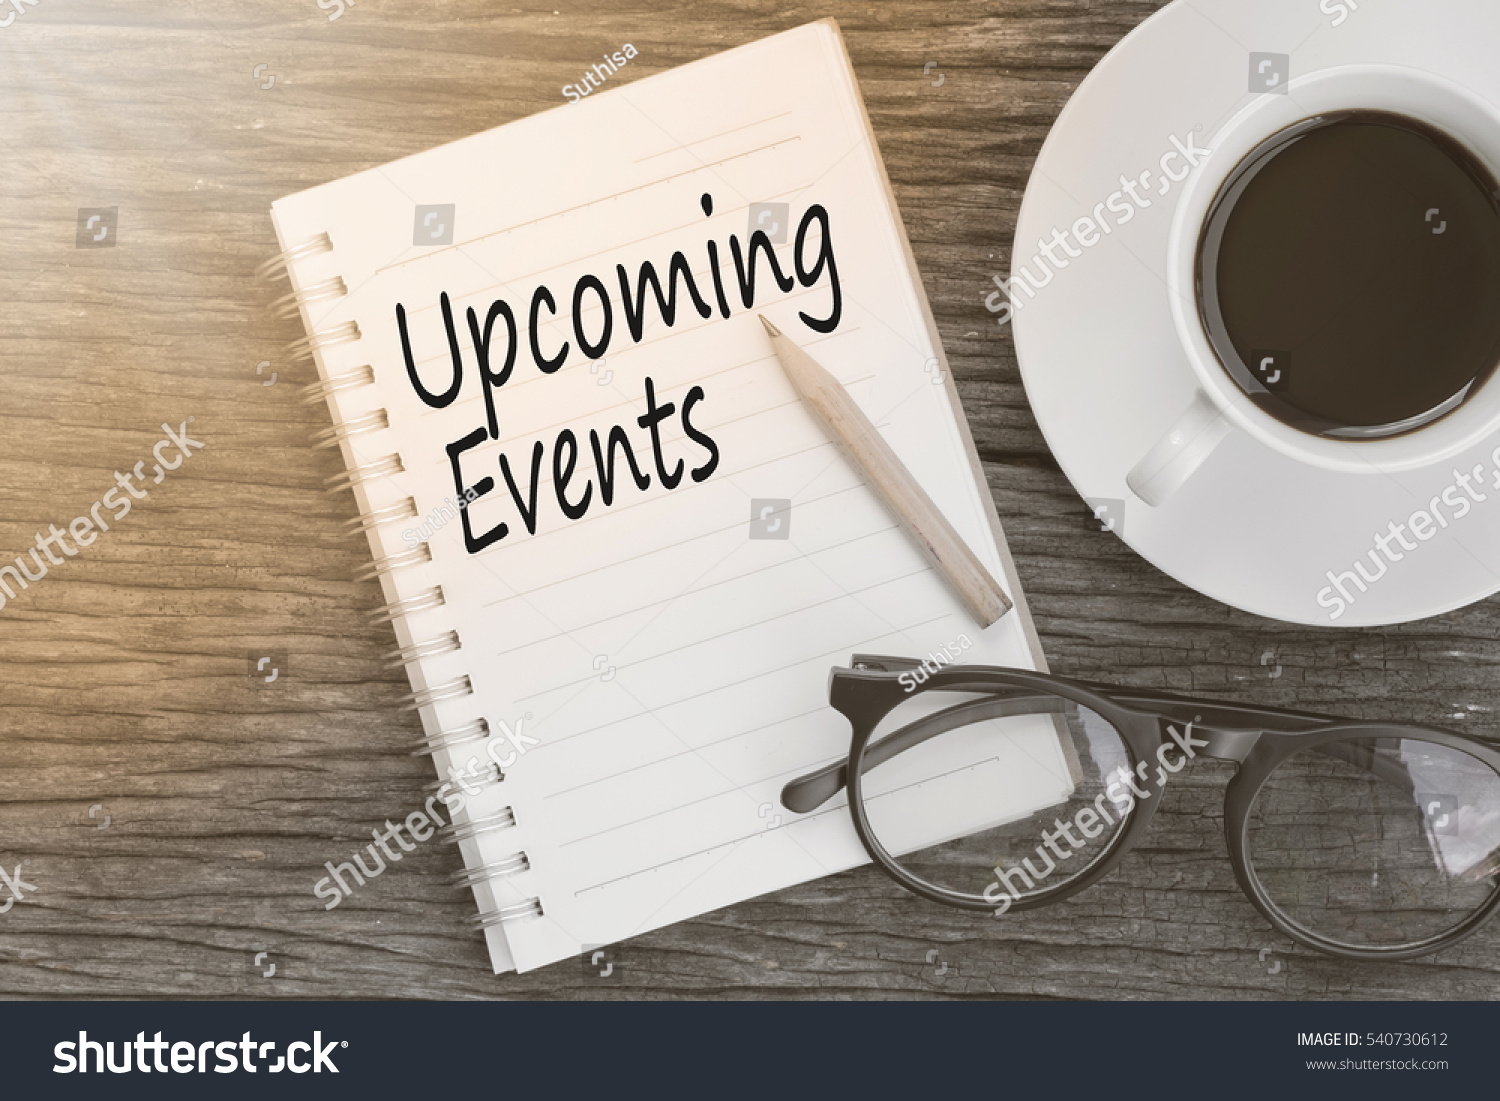 Concept Upcoming Events message on notebook with glasses, pencil and coffee cup on wooden table. #540730612